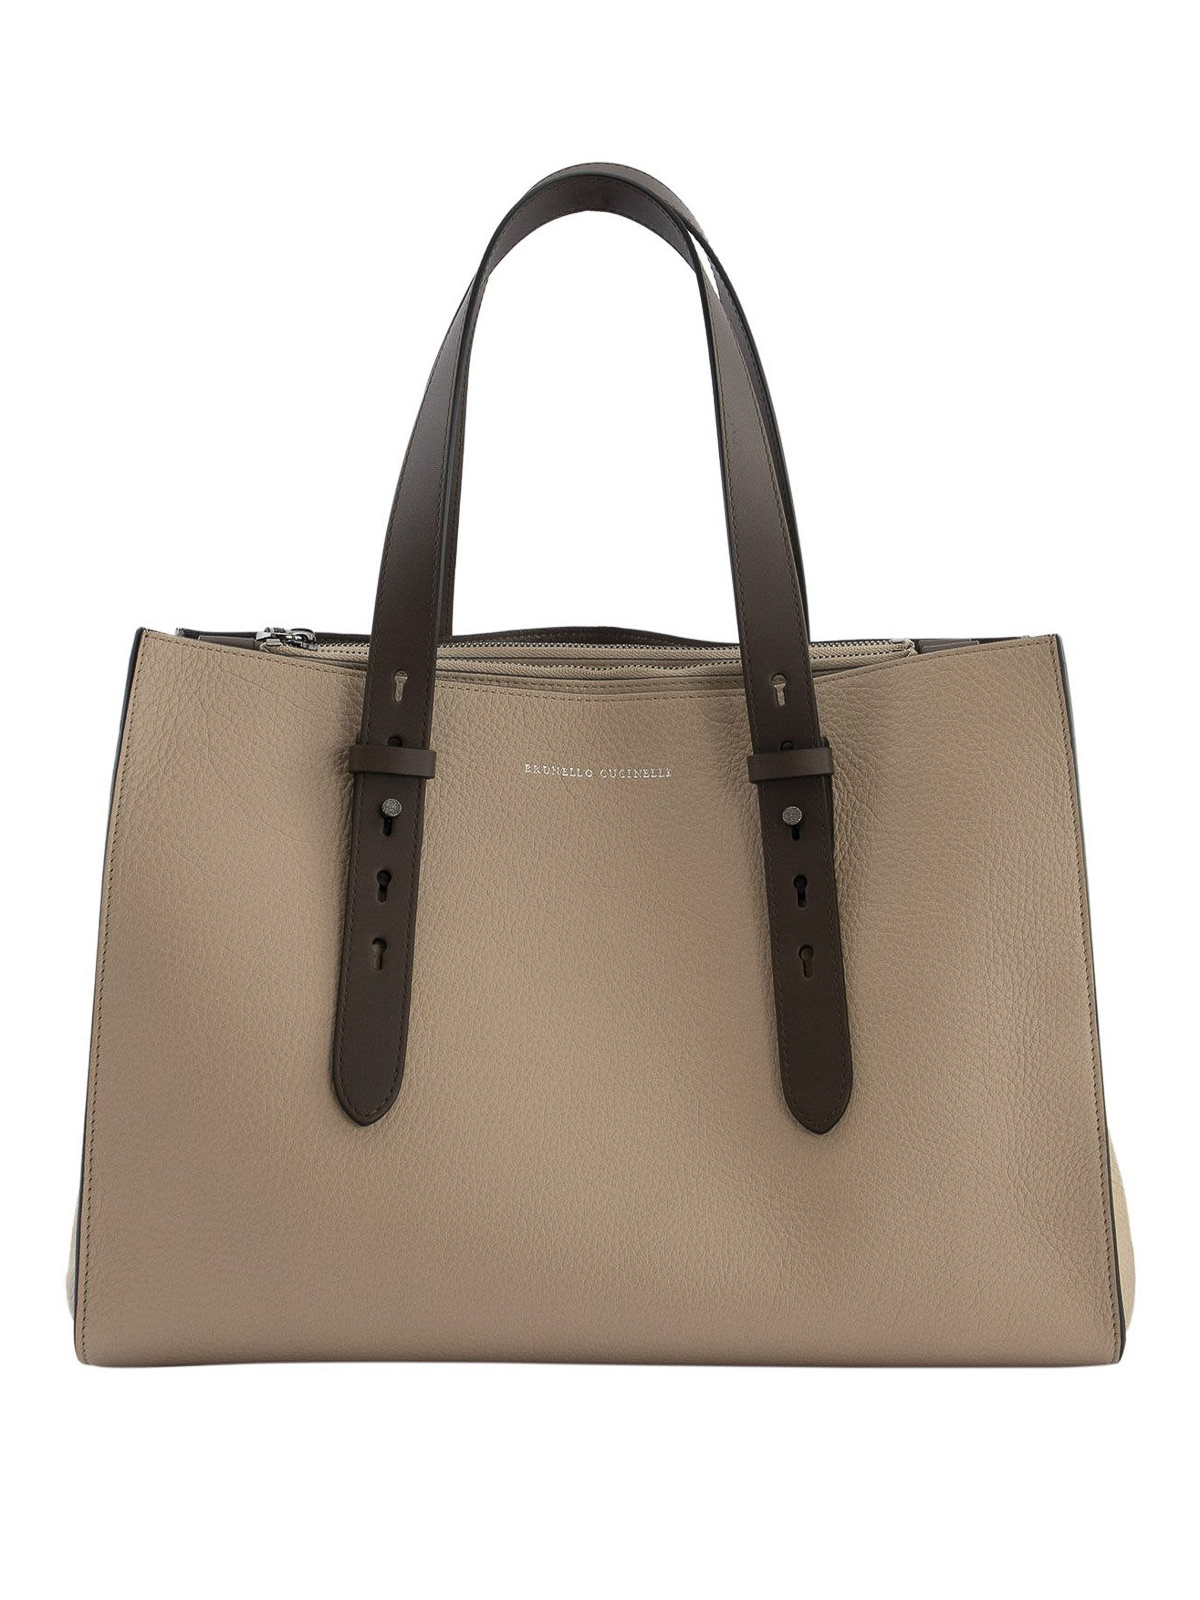 Totes bags Brunello Cucinelli - Hammered leather tote - MBVND2176C7841